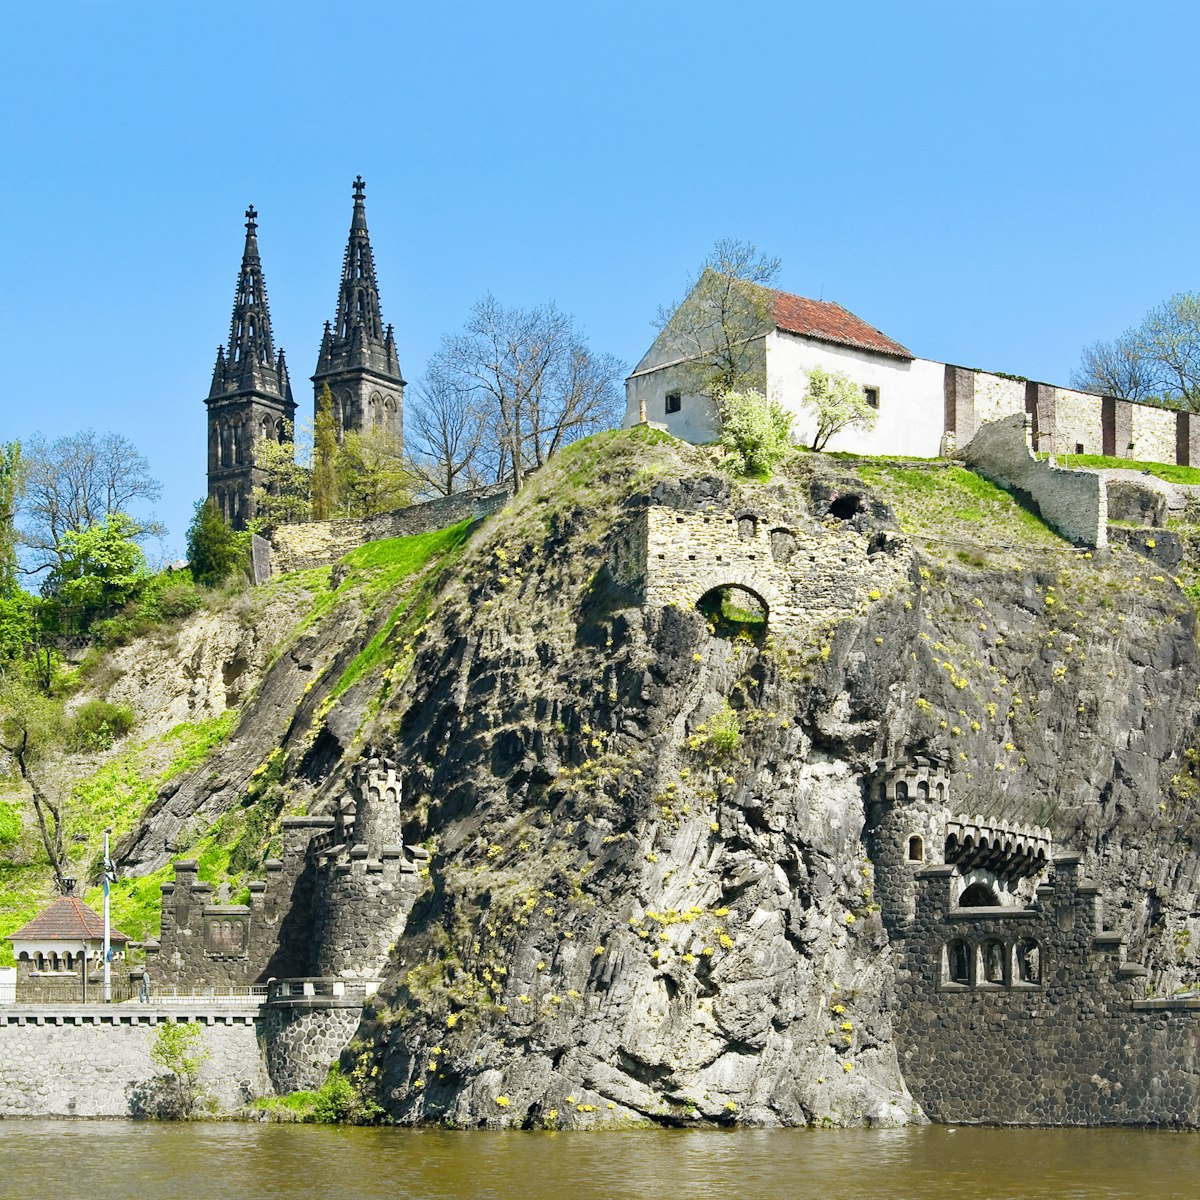 Vyšehrad. The castle on a hill over the Vltava River. Prague, Czech Republic.; Shutterstock ID 92942548; Your name (First / Last): Gemma Graham; GL account no.: 65050; Netsuite department name: Online Editorial; Full Product or Project name including edition: Cities app POI images